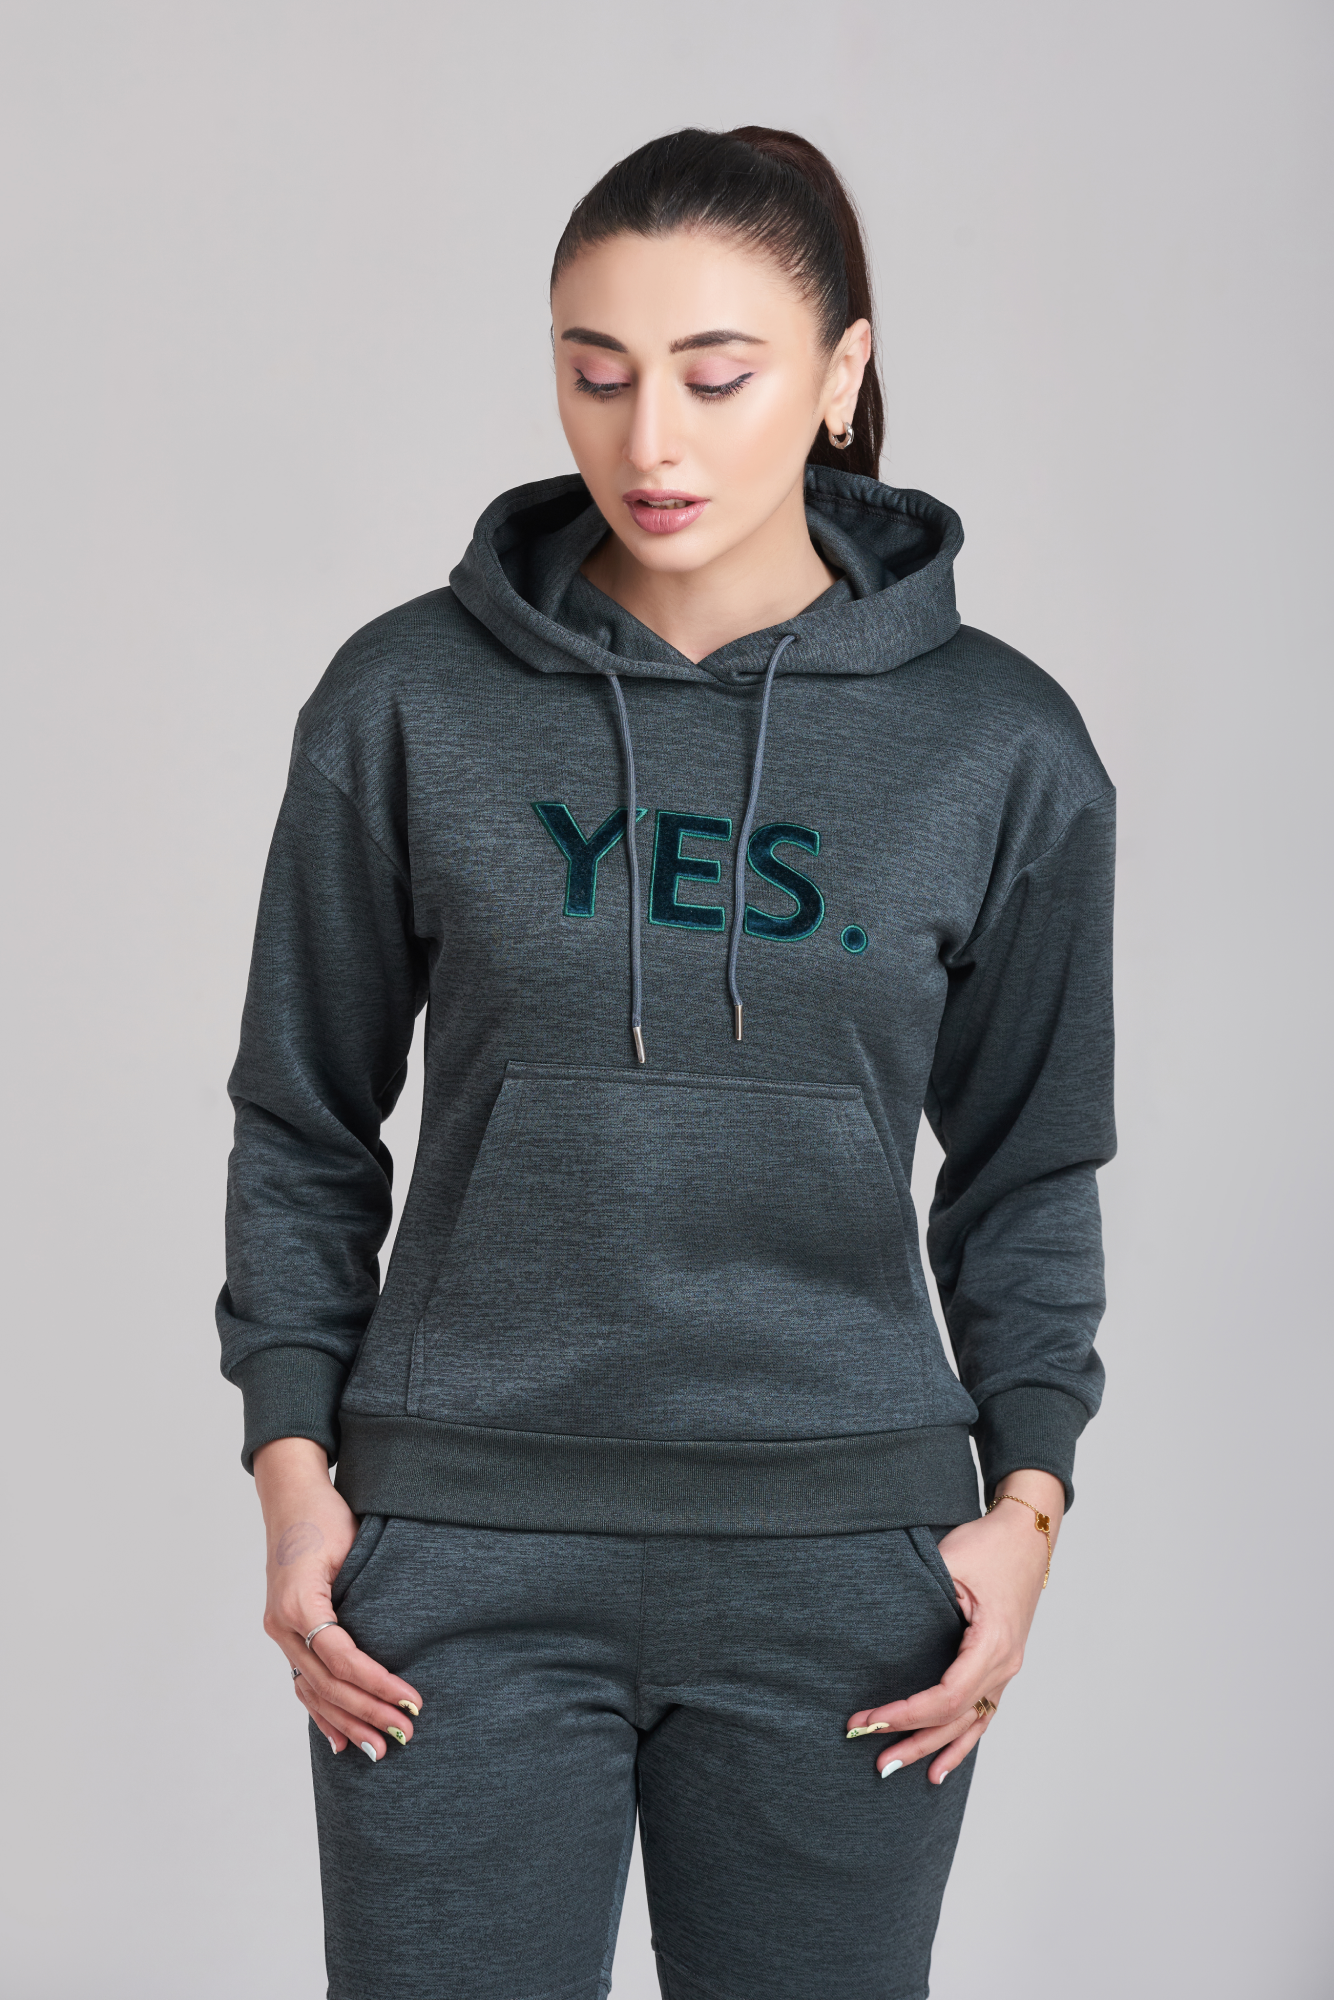 Braves-Vibes Charcoal Hoody Tracksuit - Women